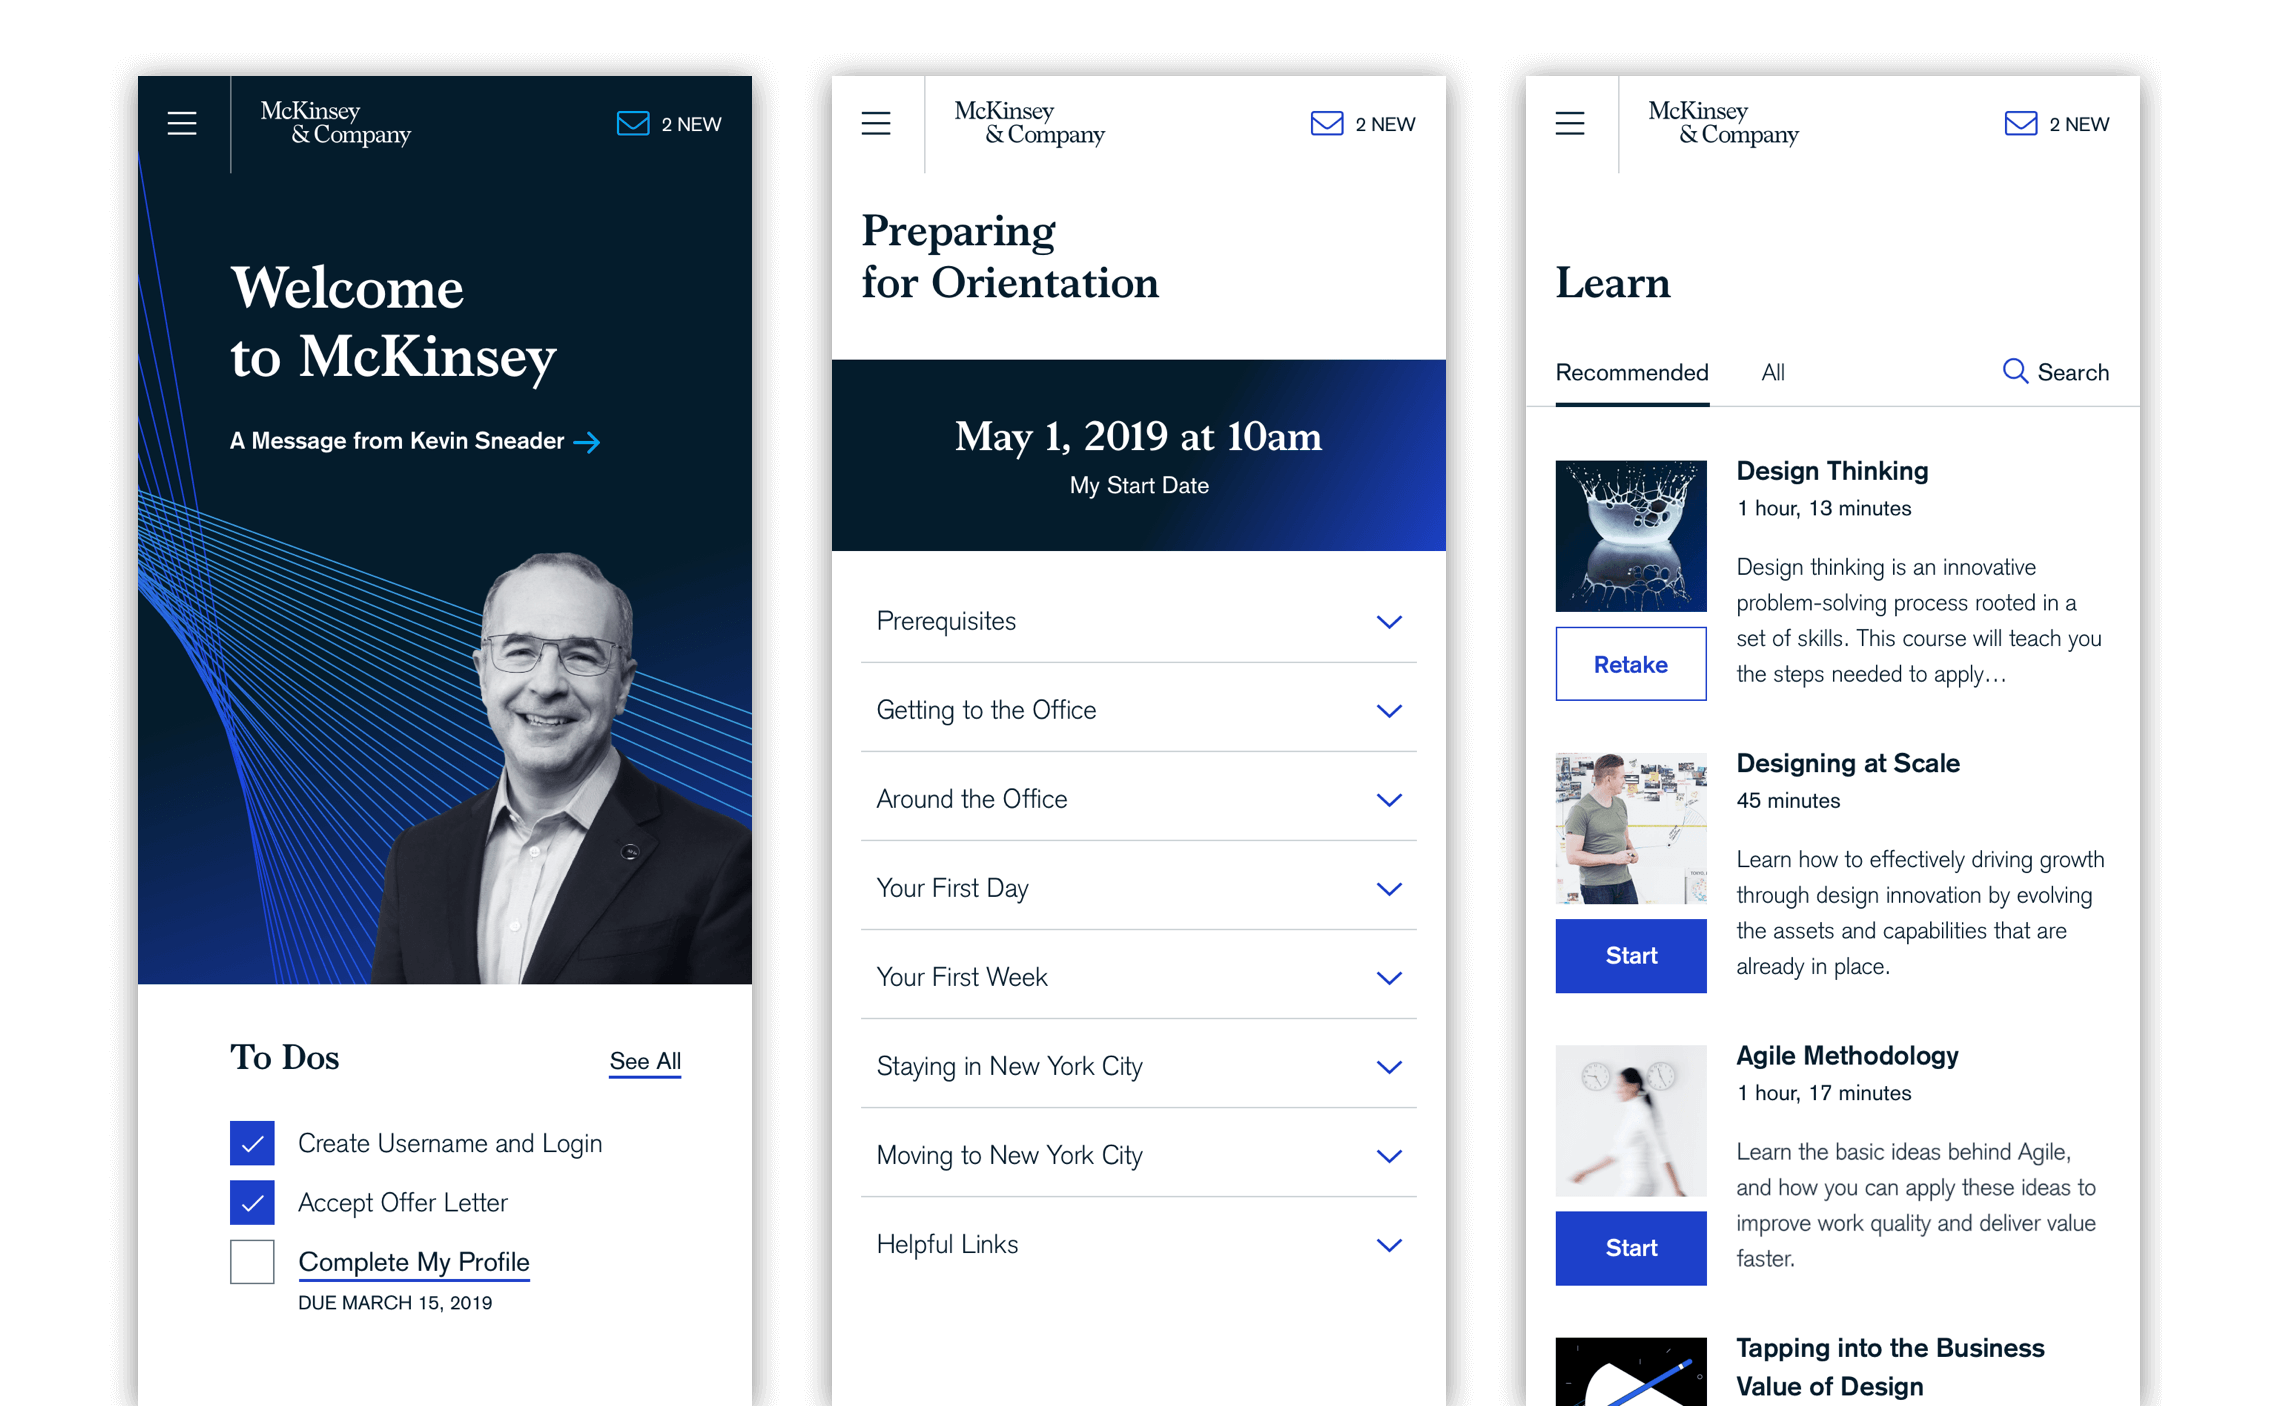 Screens from the McKinsey onboarding app: Home and To Dos list, Preparing for Orientation, and Learning courses